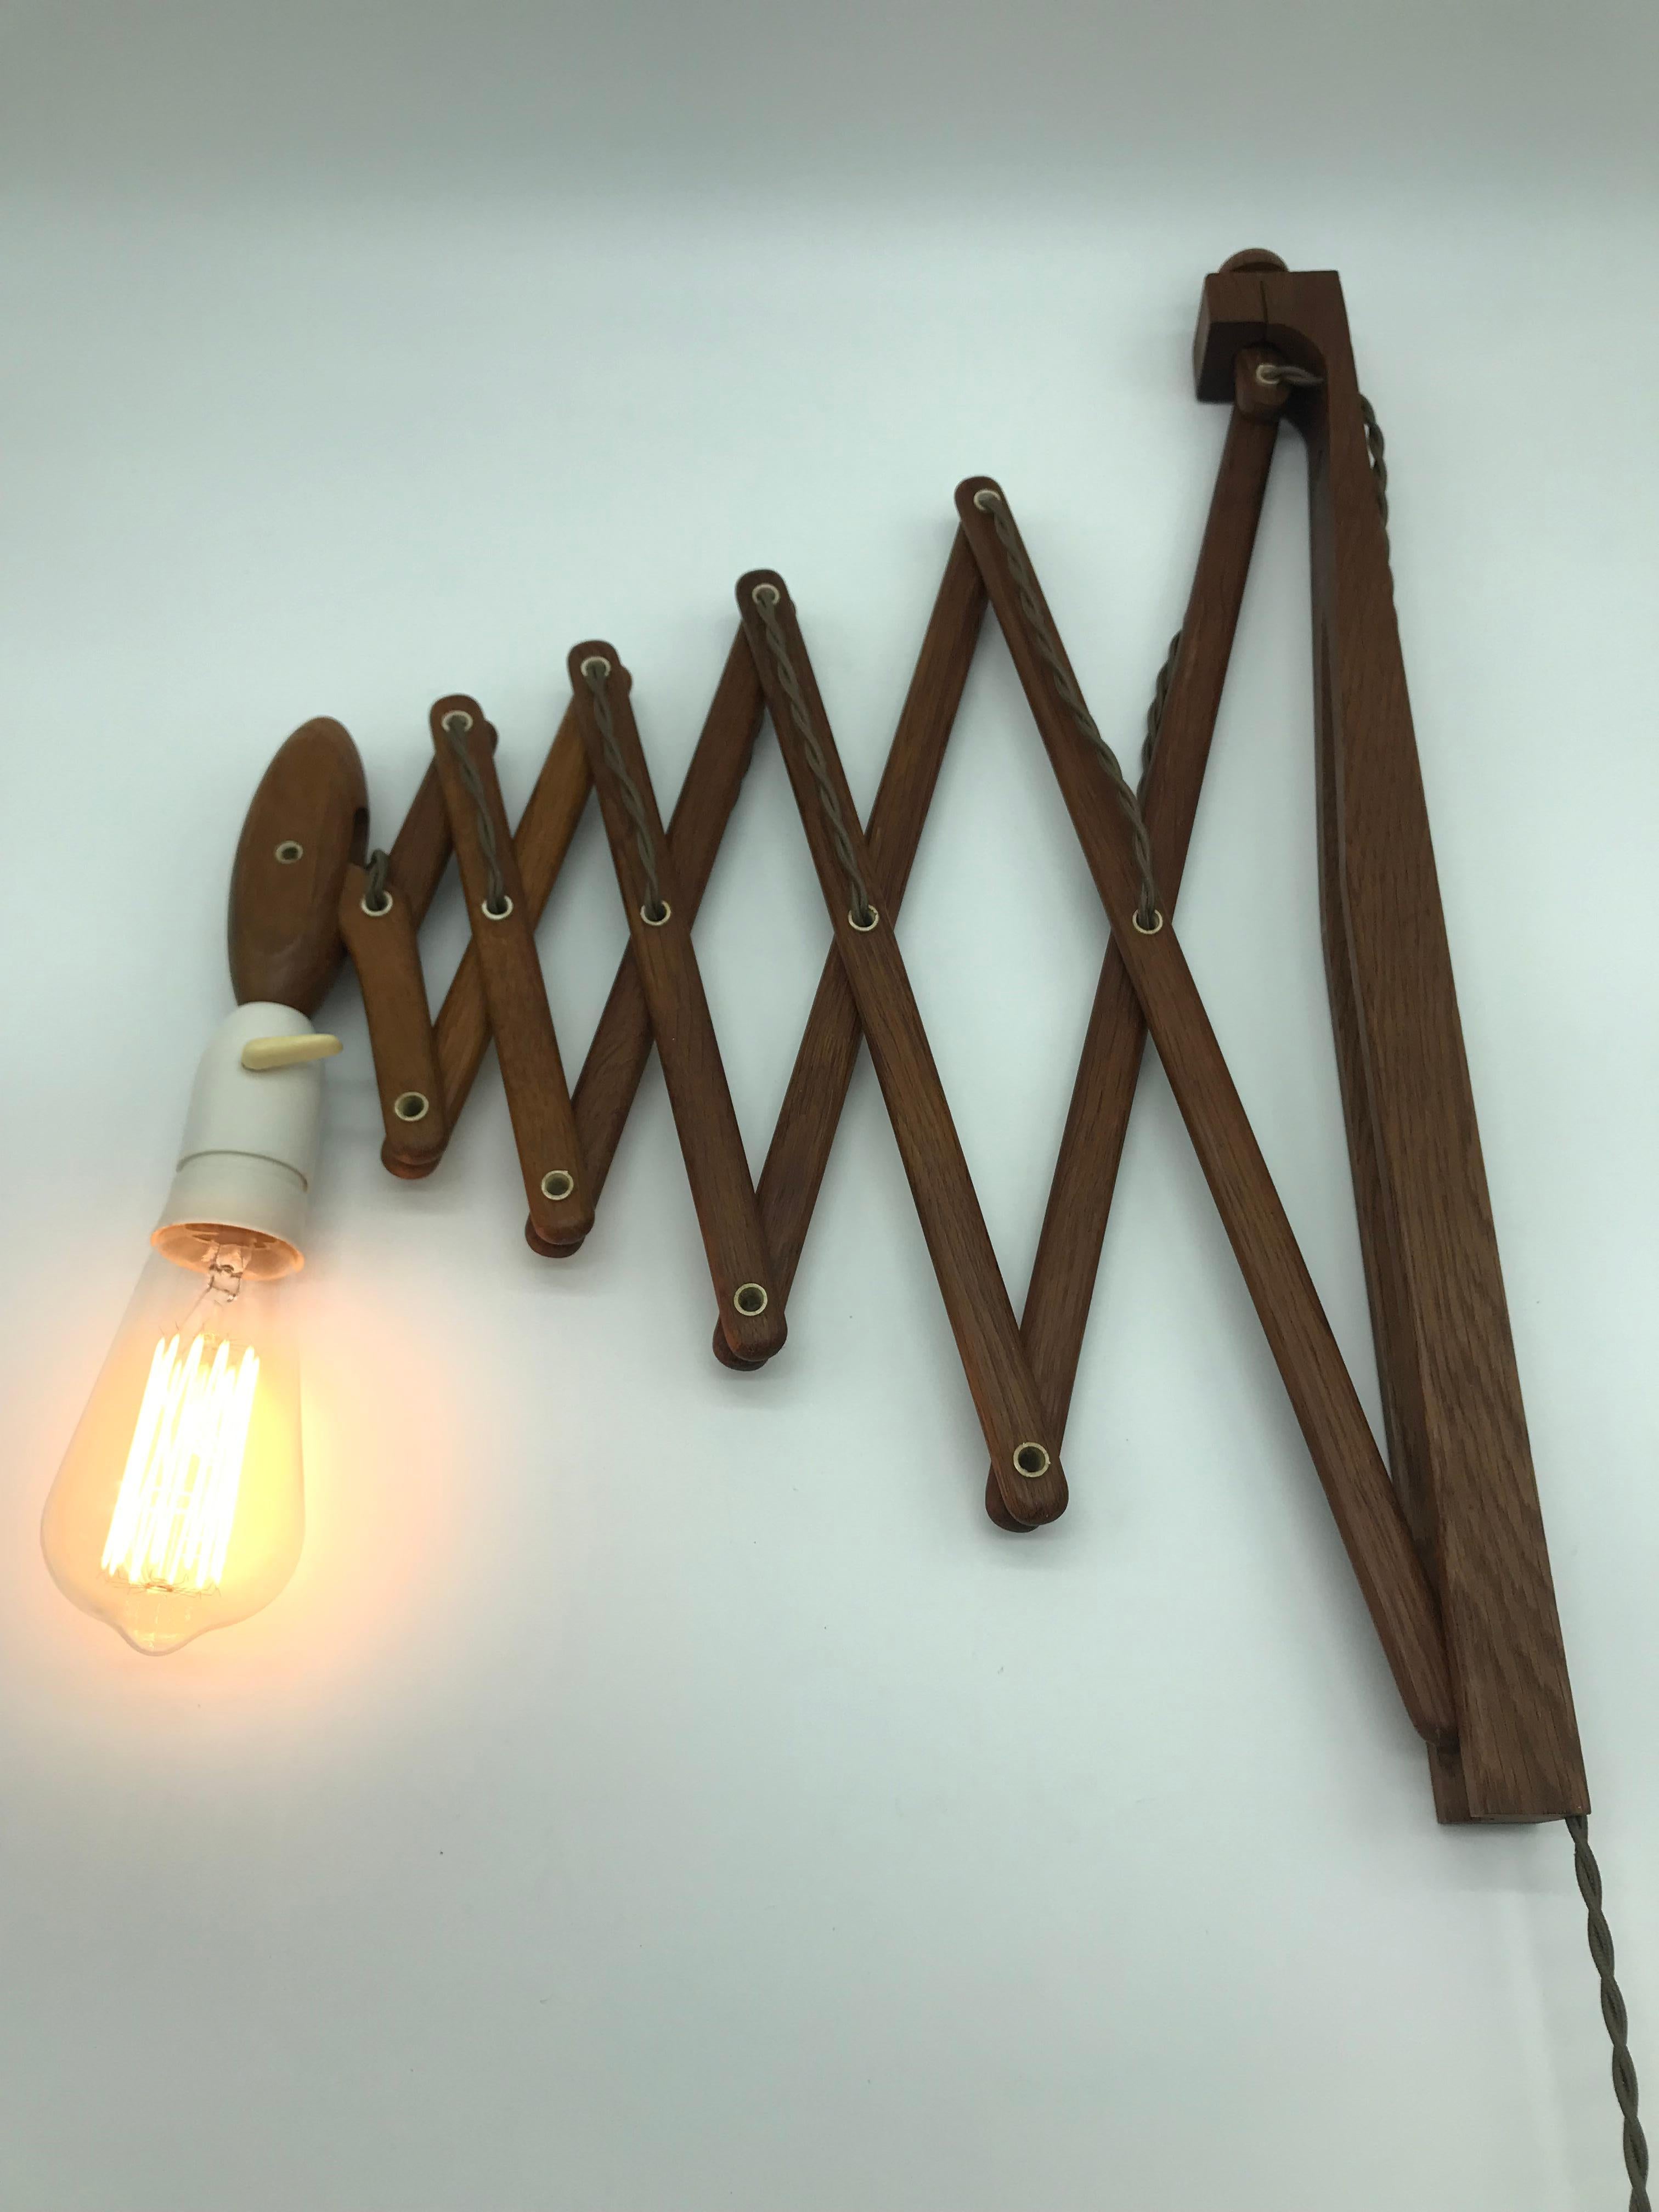 Iconic Vintage Le Klint scissor lamp down light in teak from the 1960s and designed by Erik Hansen
In great vintage condition with new wiring and ready to use. 
Danish design and quality at its best.